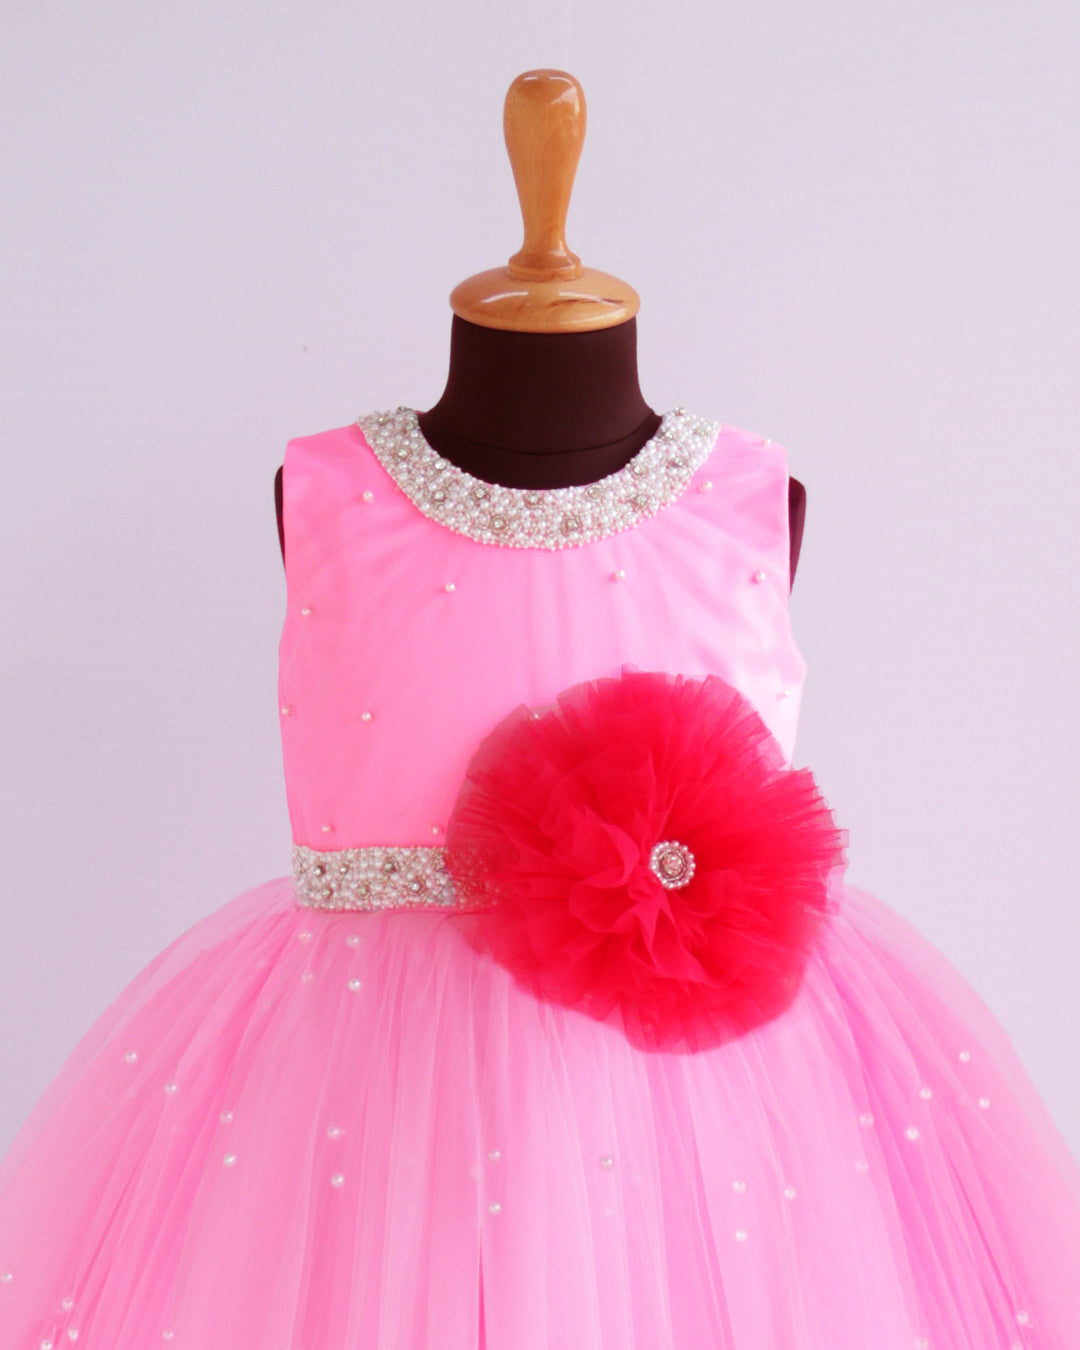 Baby Pink & Rany Pink Combo Beads Handwork Partywear Frock
Material: Baby pink and rany pink shade handwork baby-girls partywear birthday frock is made with soft mono nylon net fabric. Yoke part is designed in a normal patt